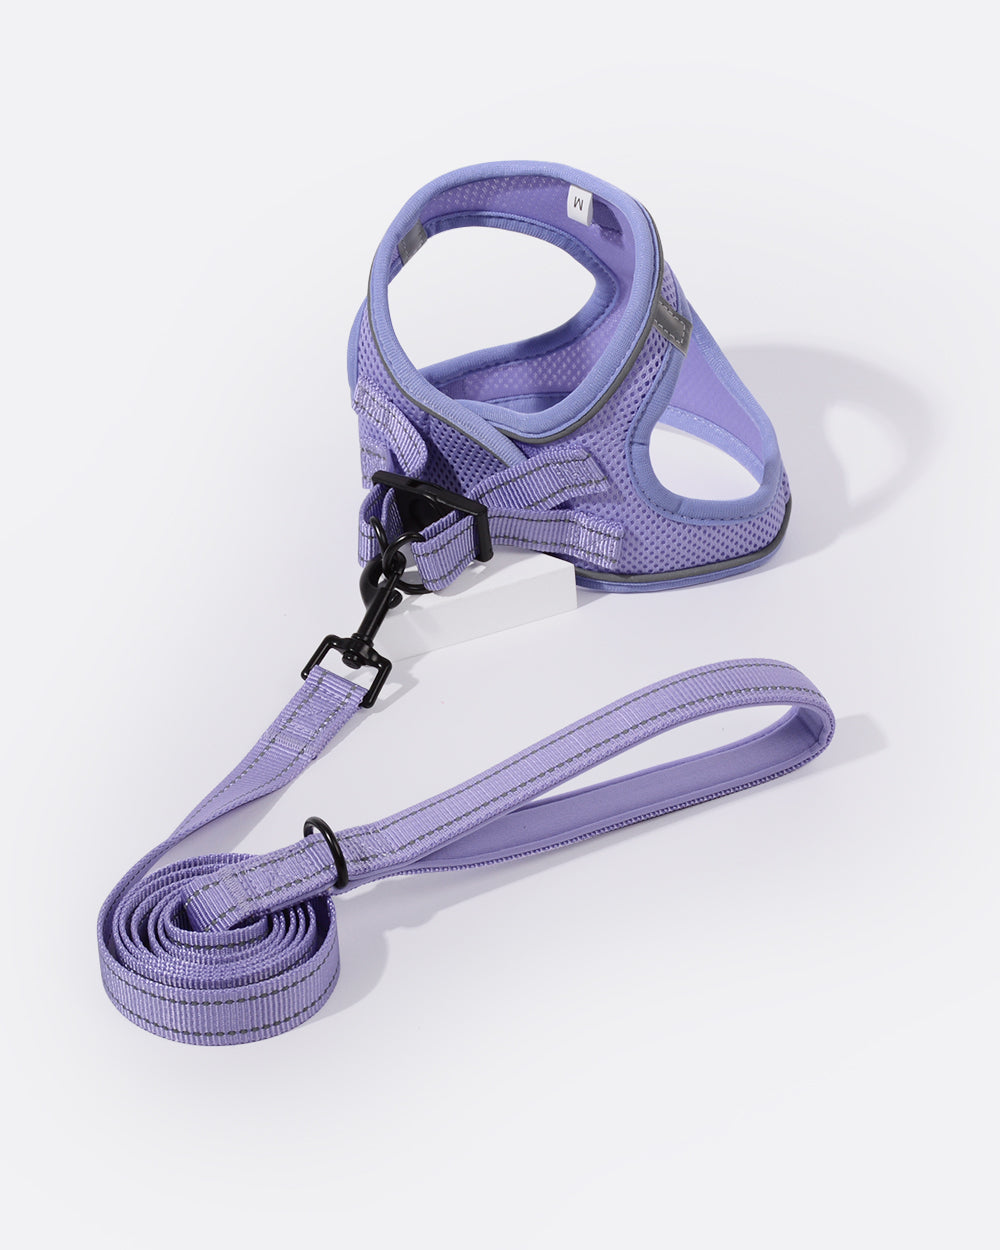 OxyMesh Step-in Harness and Leash Set - Lavender